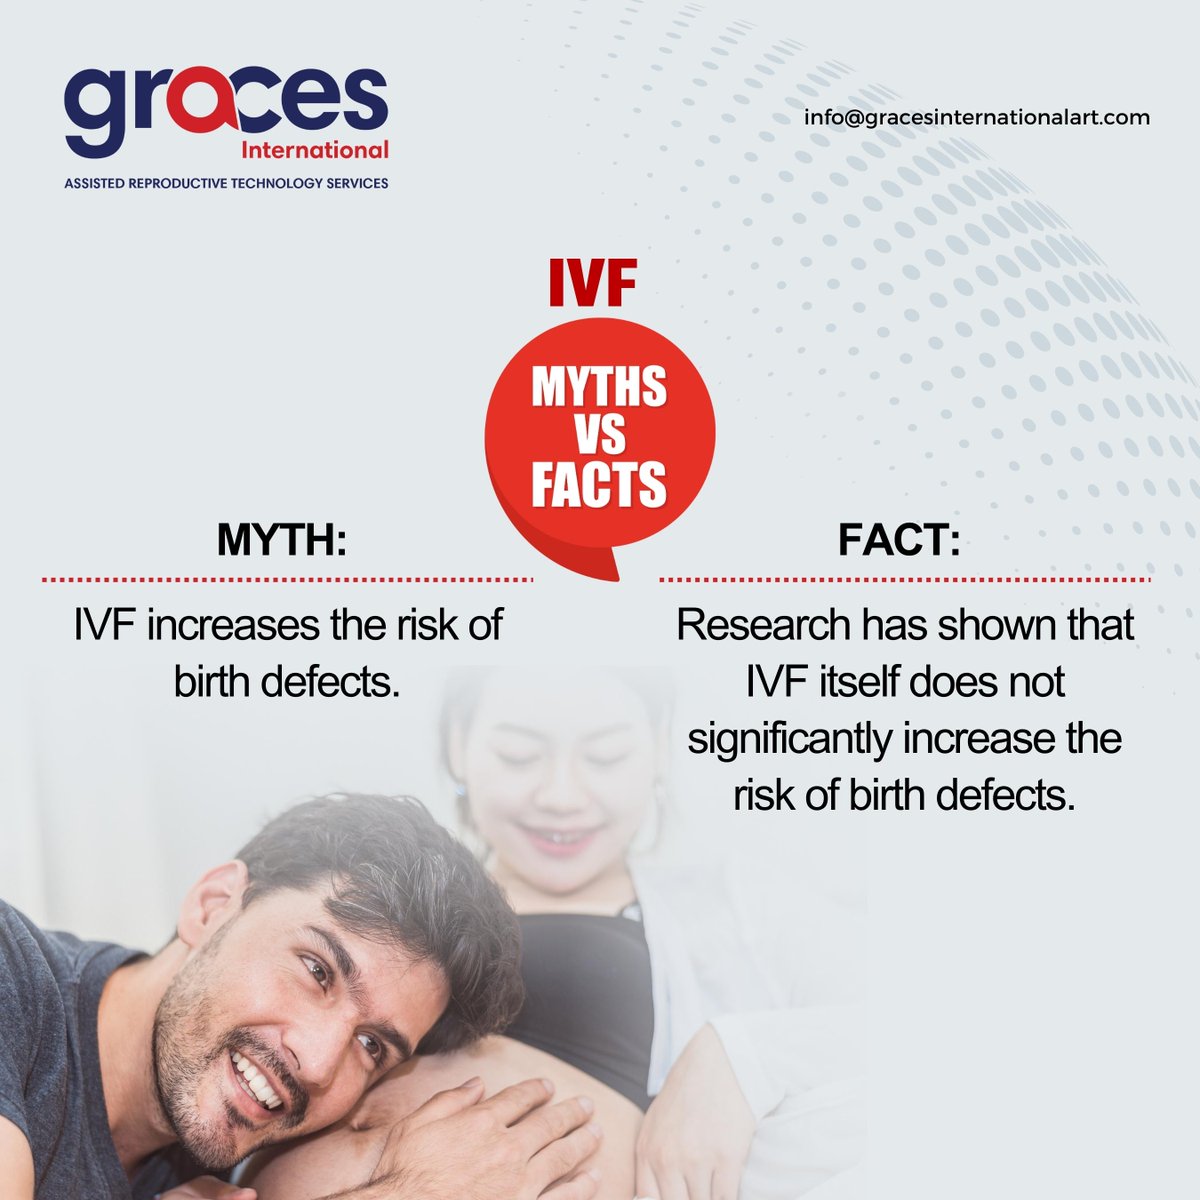 Demystify IVF for success! Consult an IVF specialist to separate fact from fiction, ensuring accurate info and protecting your mental well-being. Optimize your chances with expert guidance. #IVFMyths  #IVFFacts #FertilityTruths